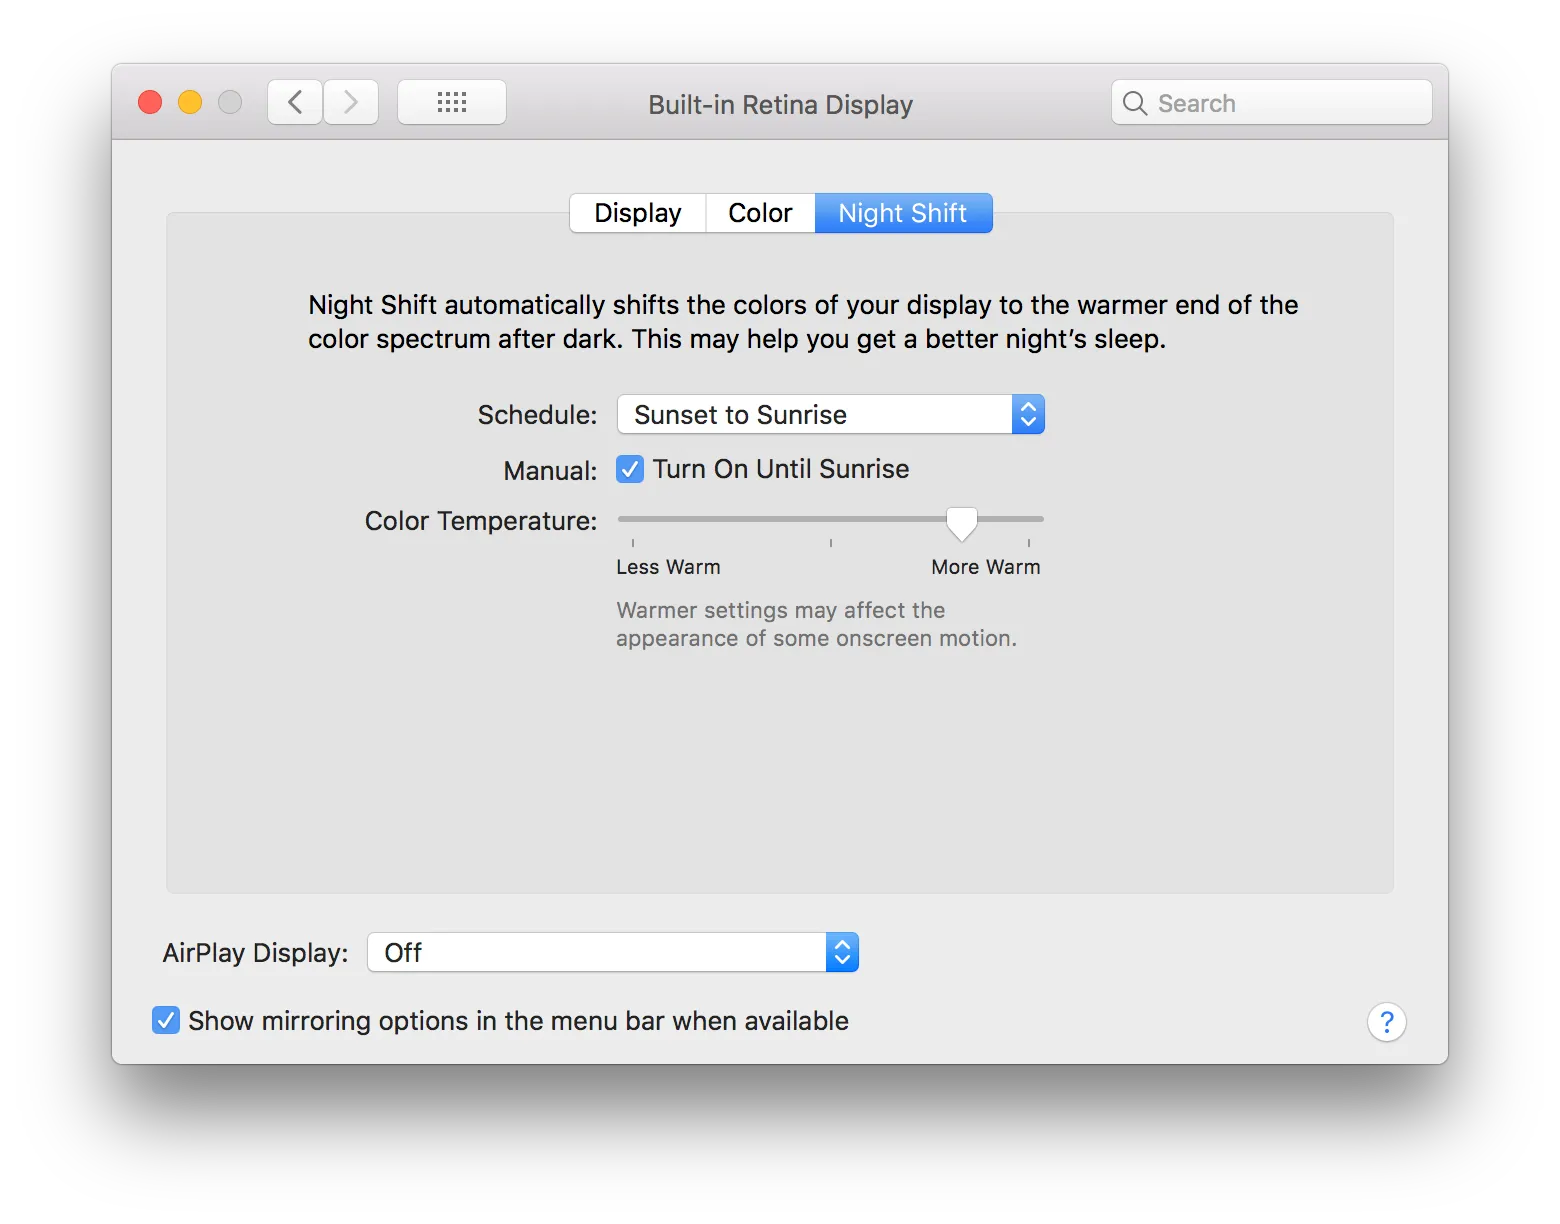 The night shift settings are built into macOS, and reduce the amount of blue light emitted between sunset and sunrise